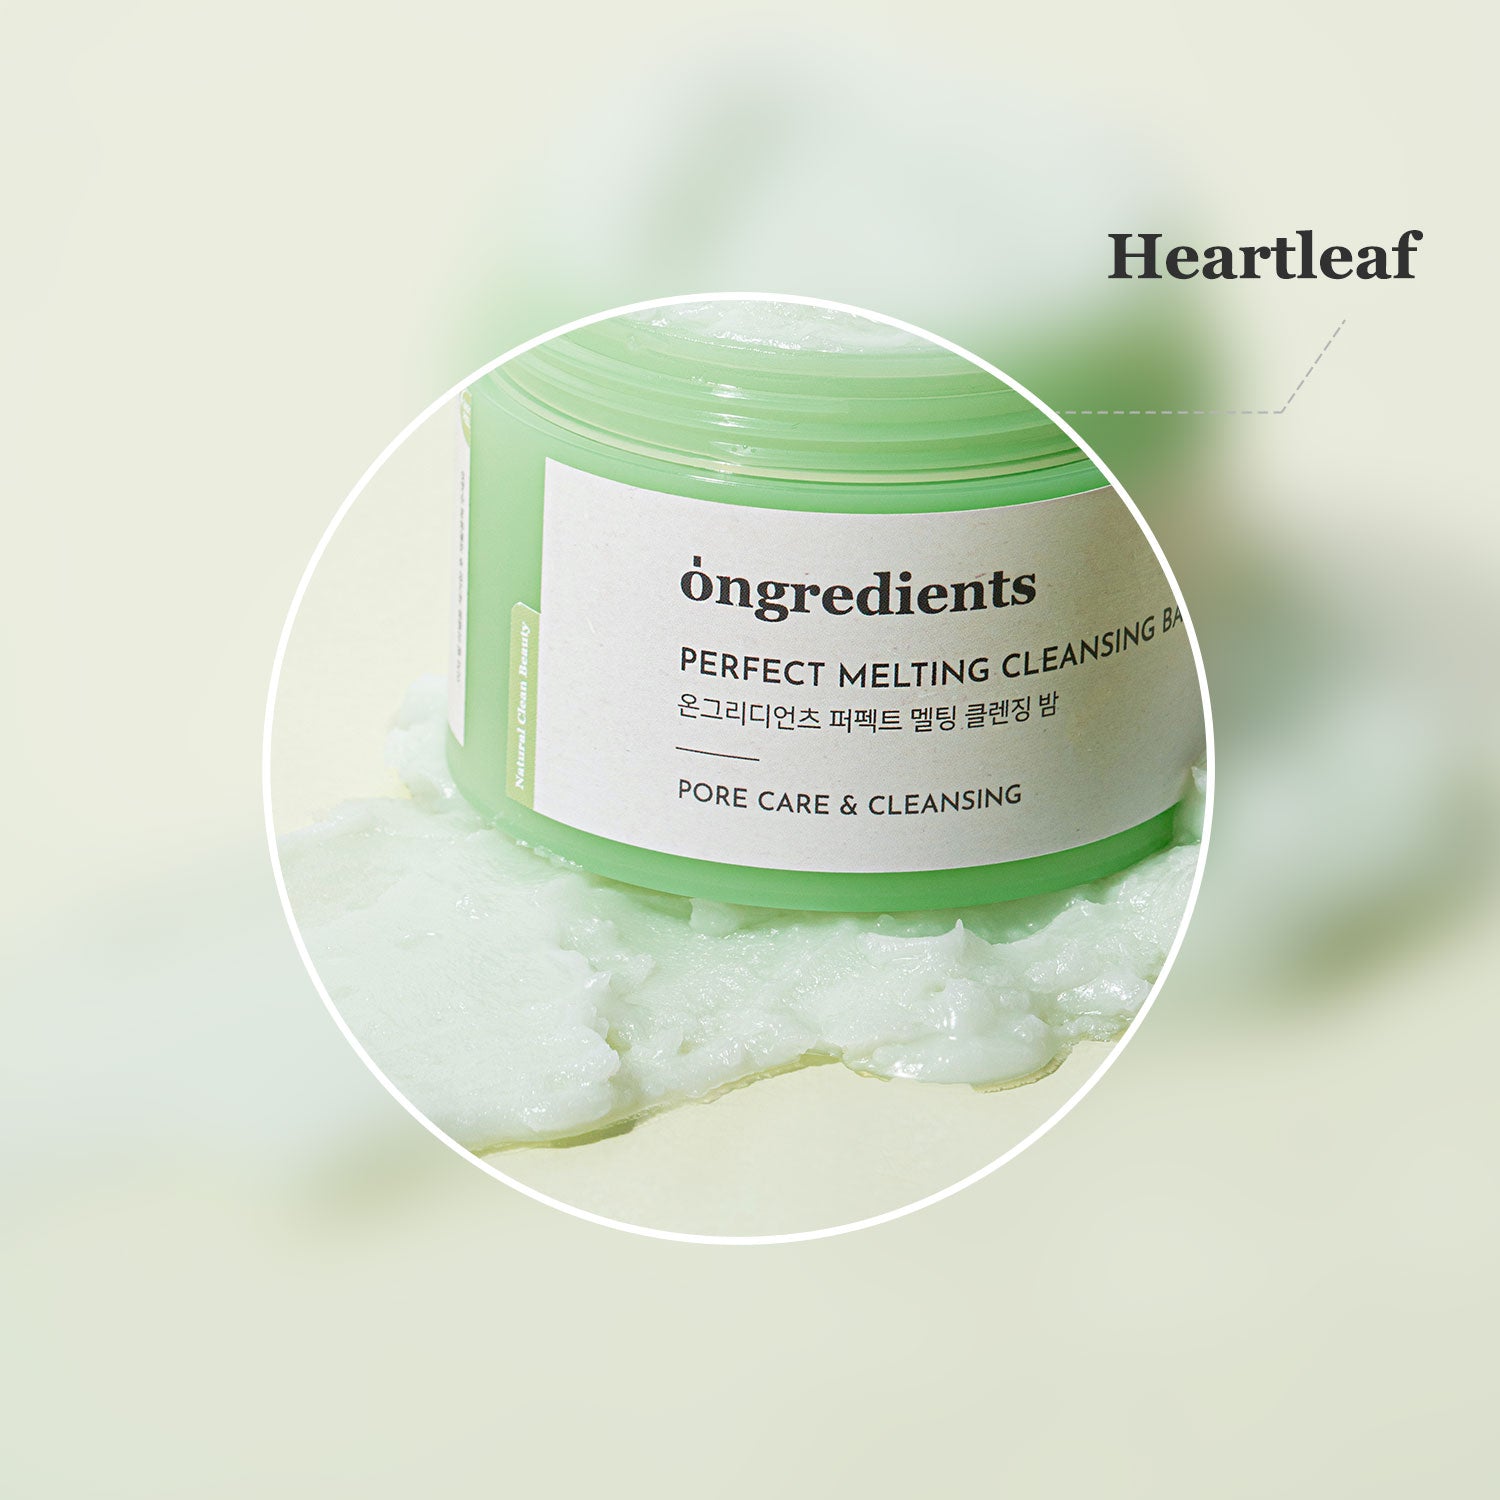 Ongredients Heartleaf Perfect Melting Cleansing Balm